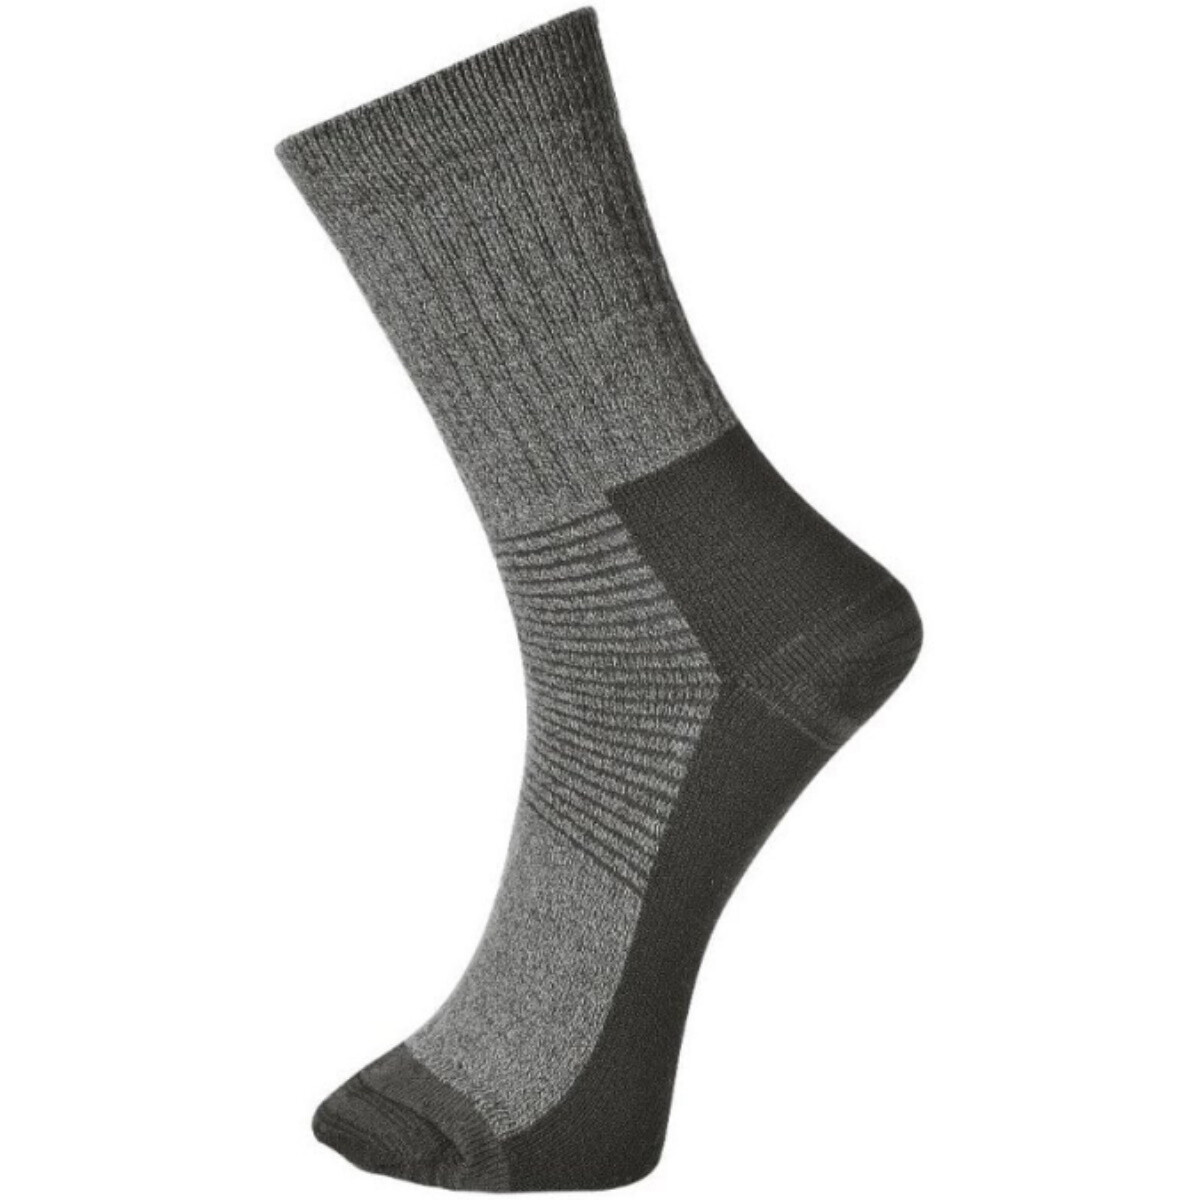 Portwest SK11 Size 10-13 (EU44-48) Thermal Socks from Lawson HIS